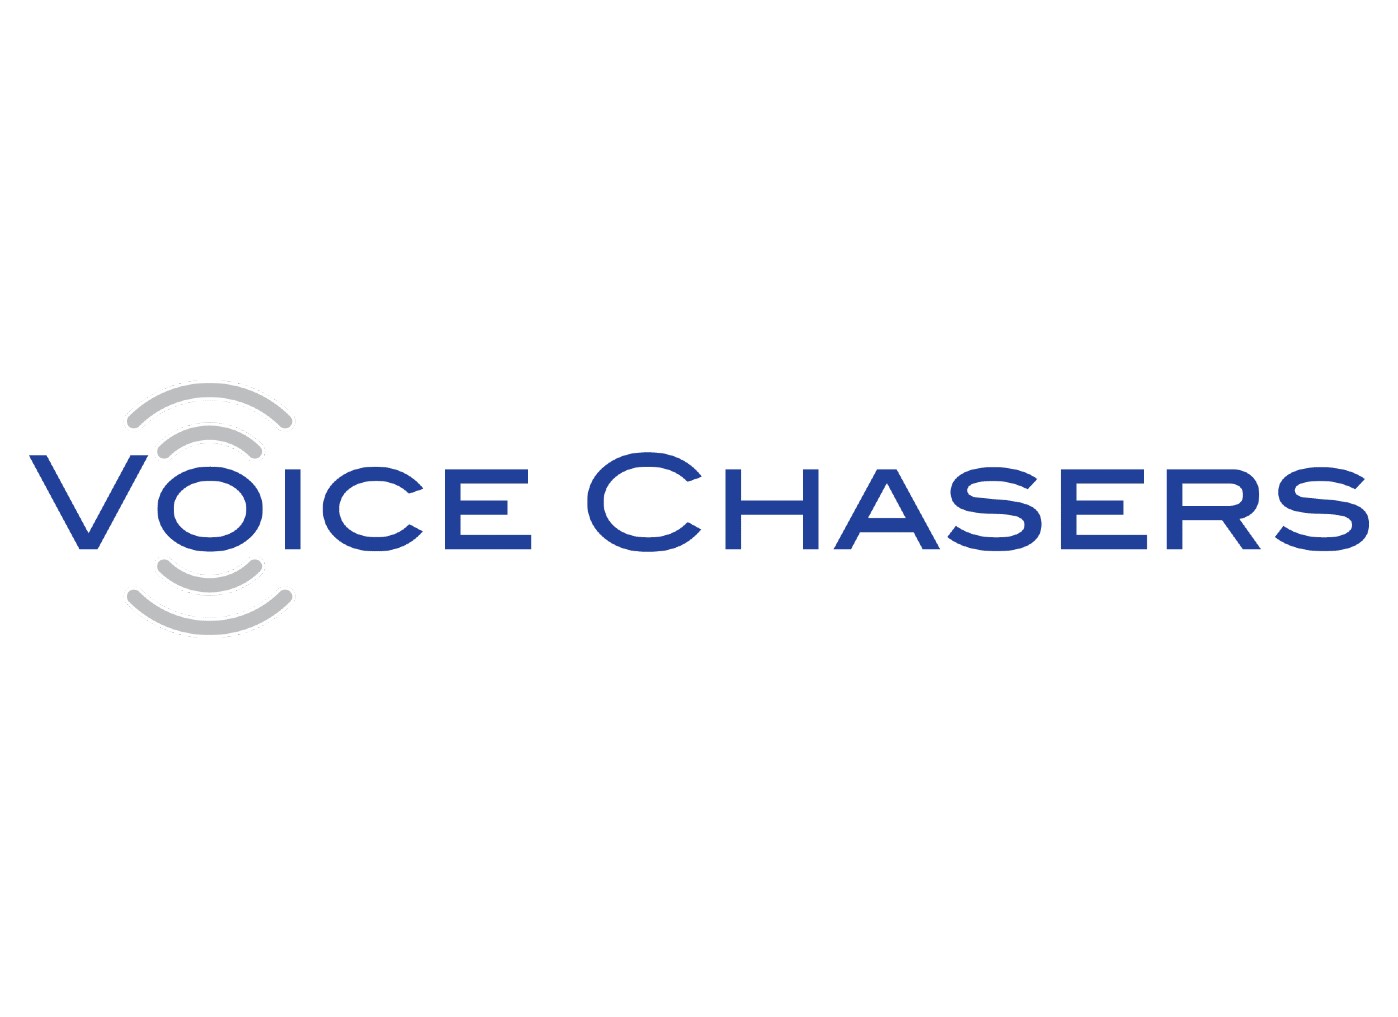 Voice Chasers